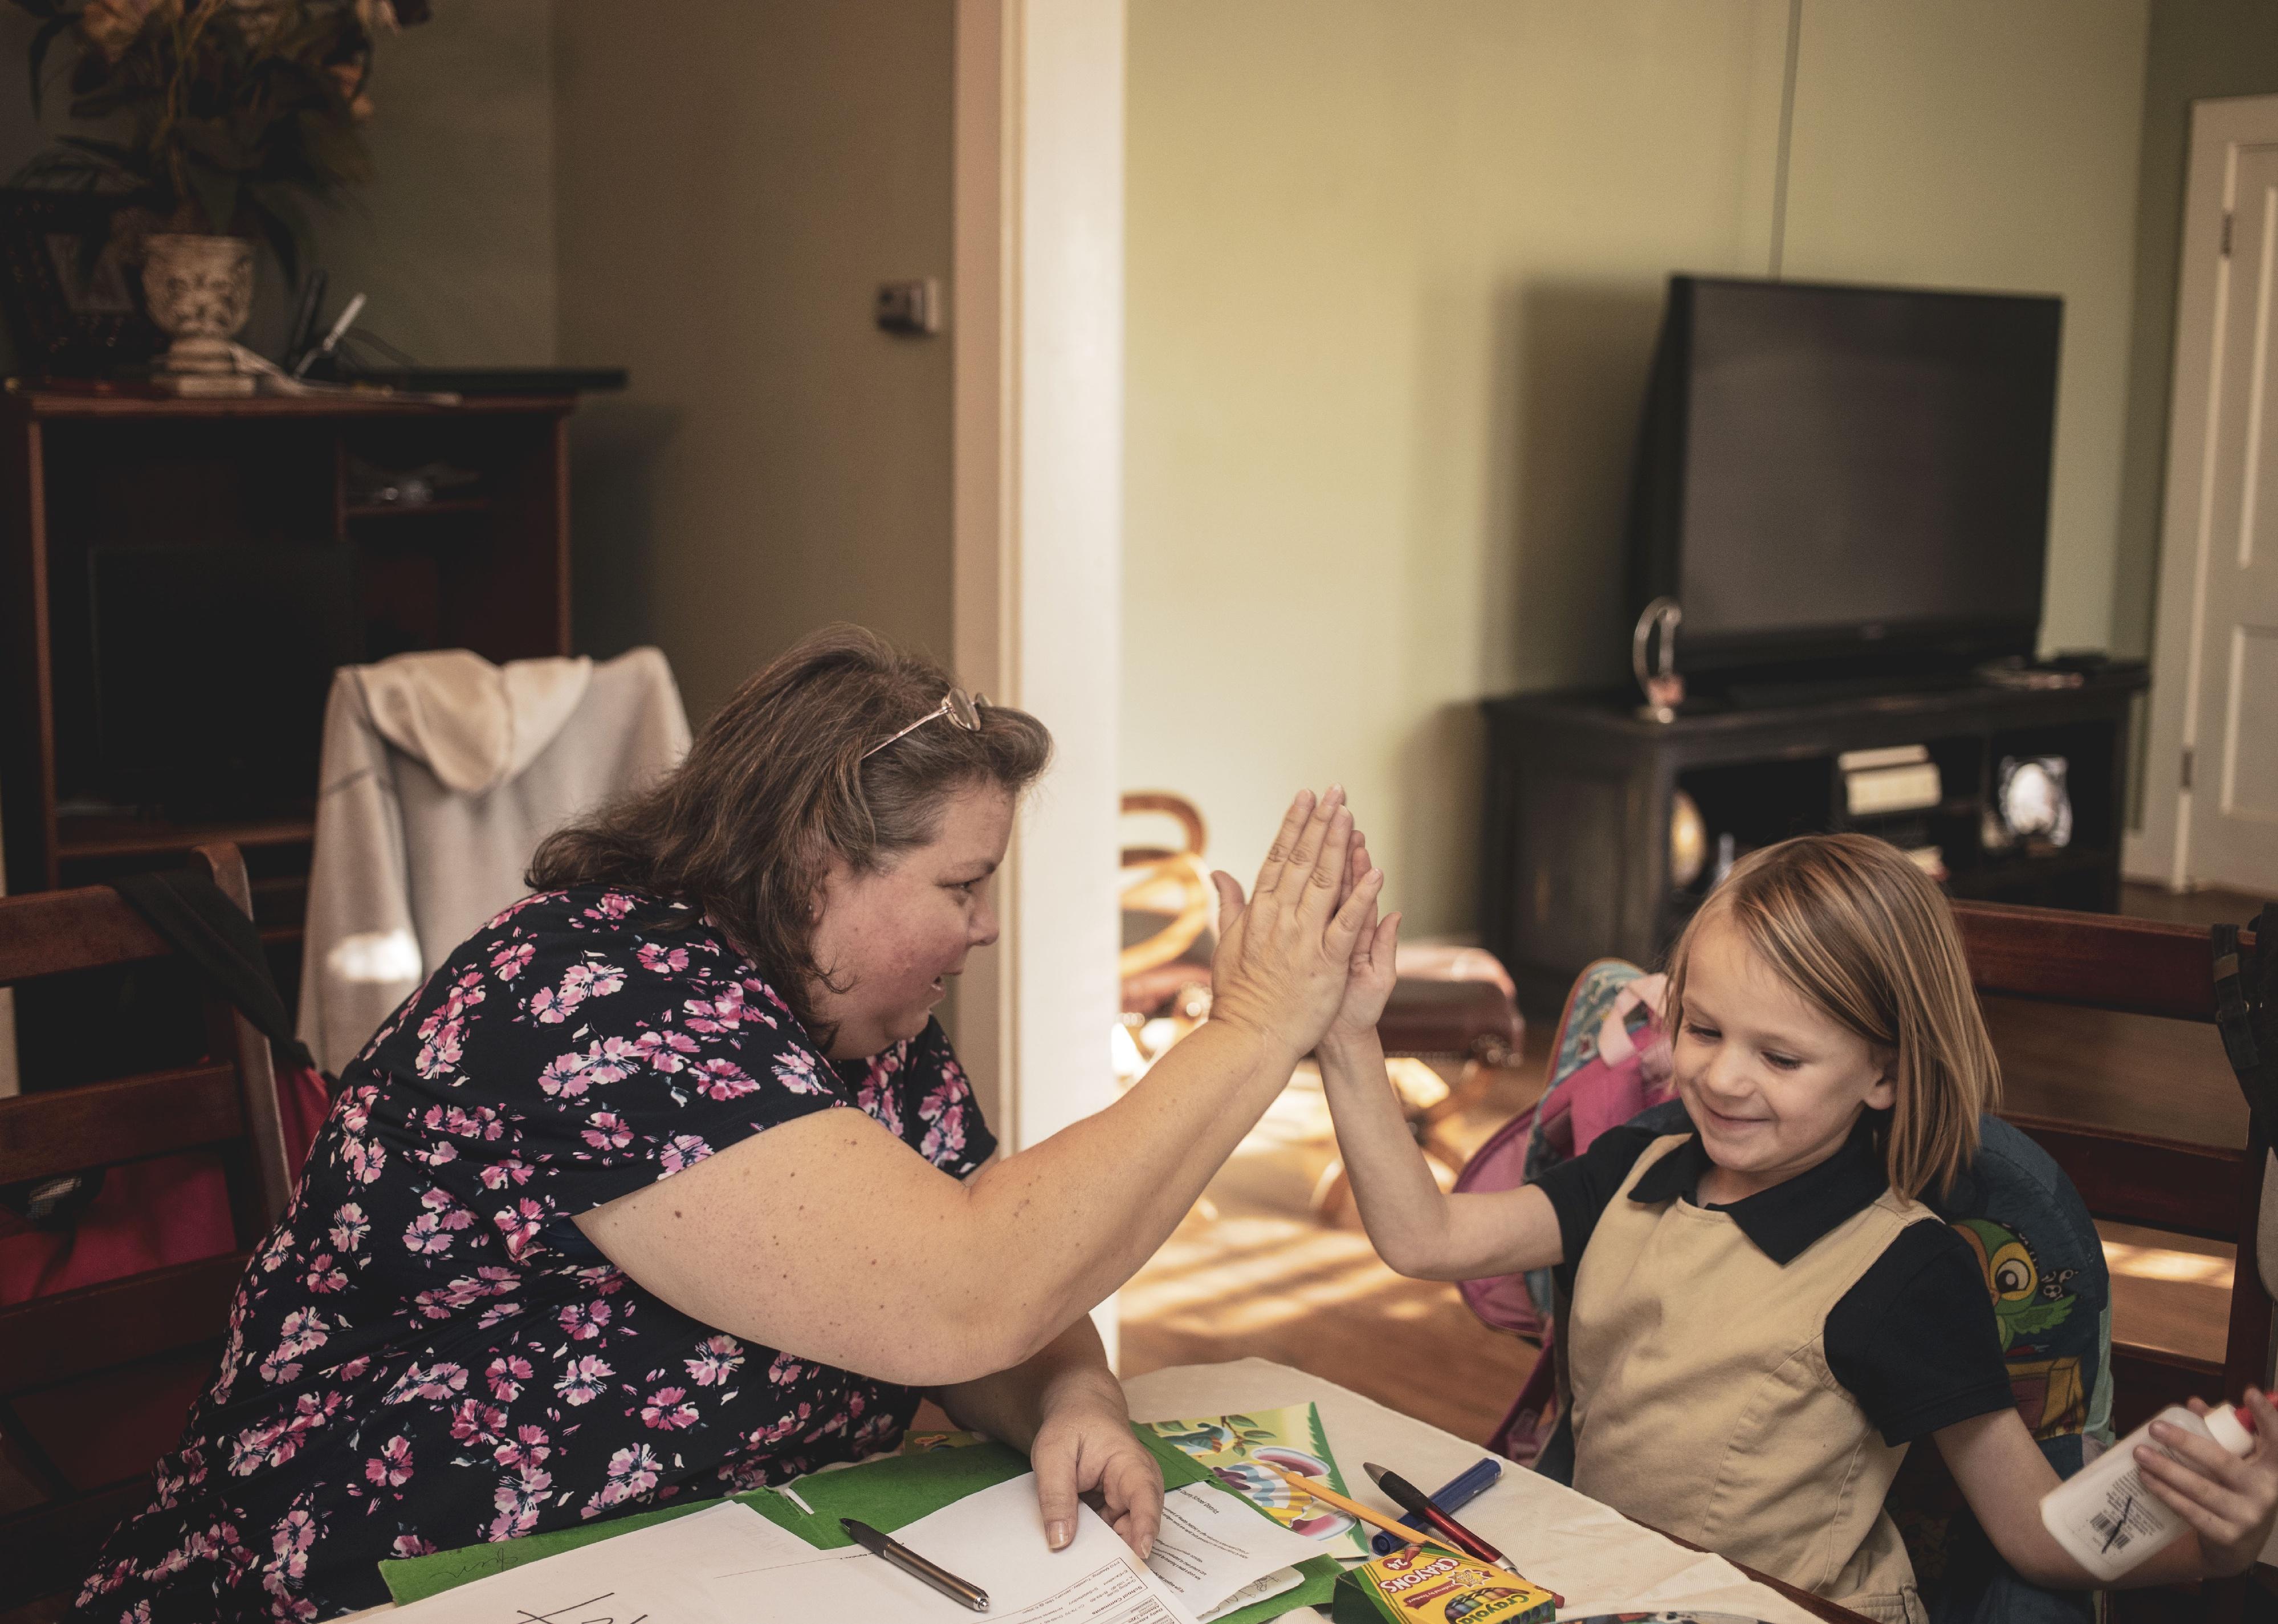 A mother gives her daughter a high-five at the kitchen table while doing homework.